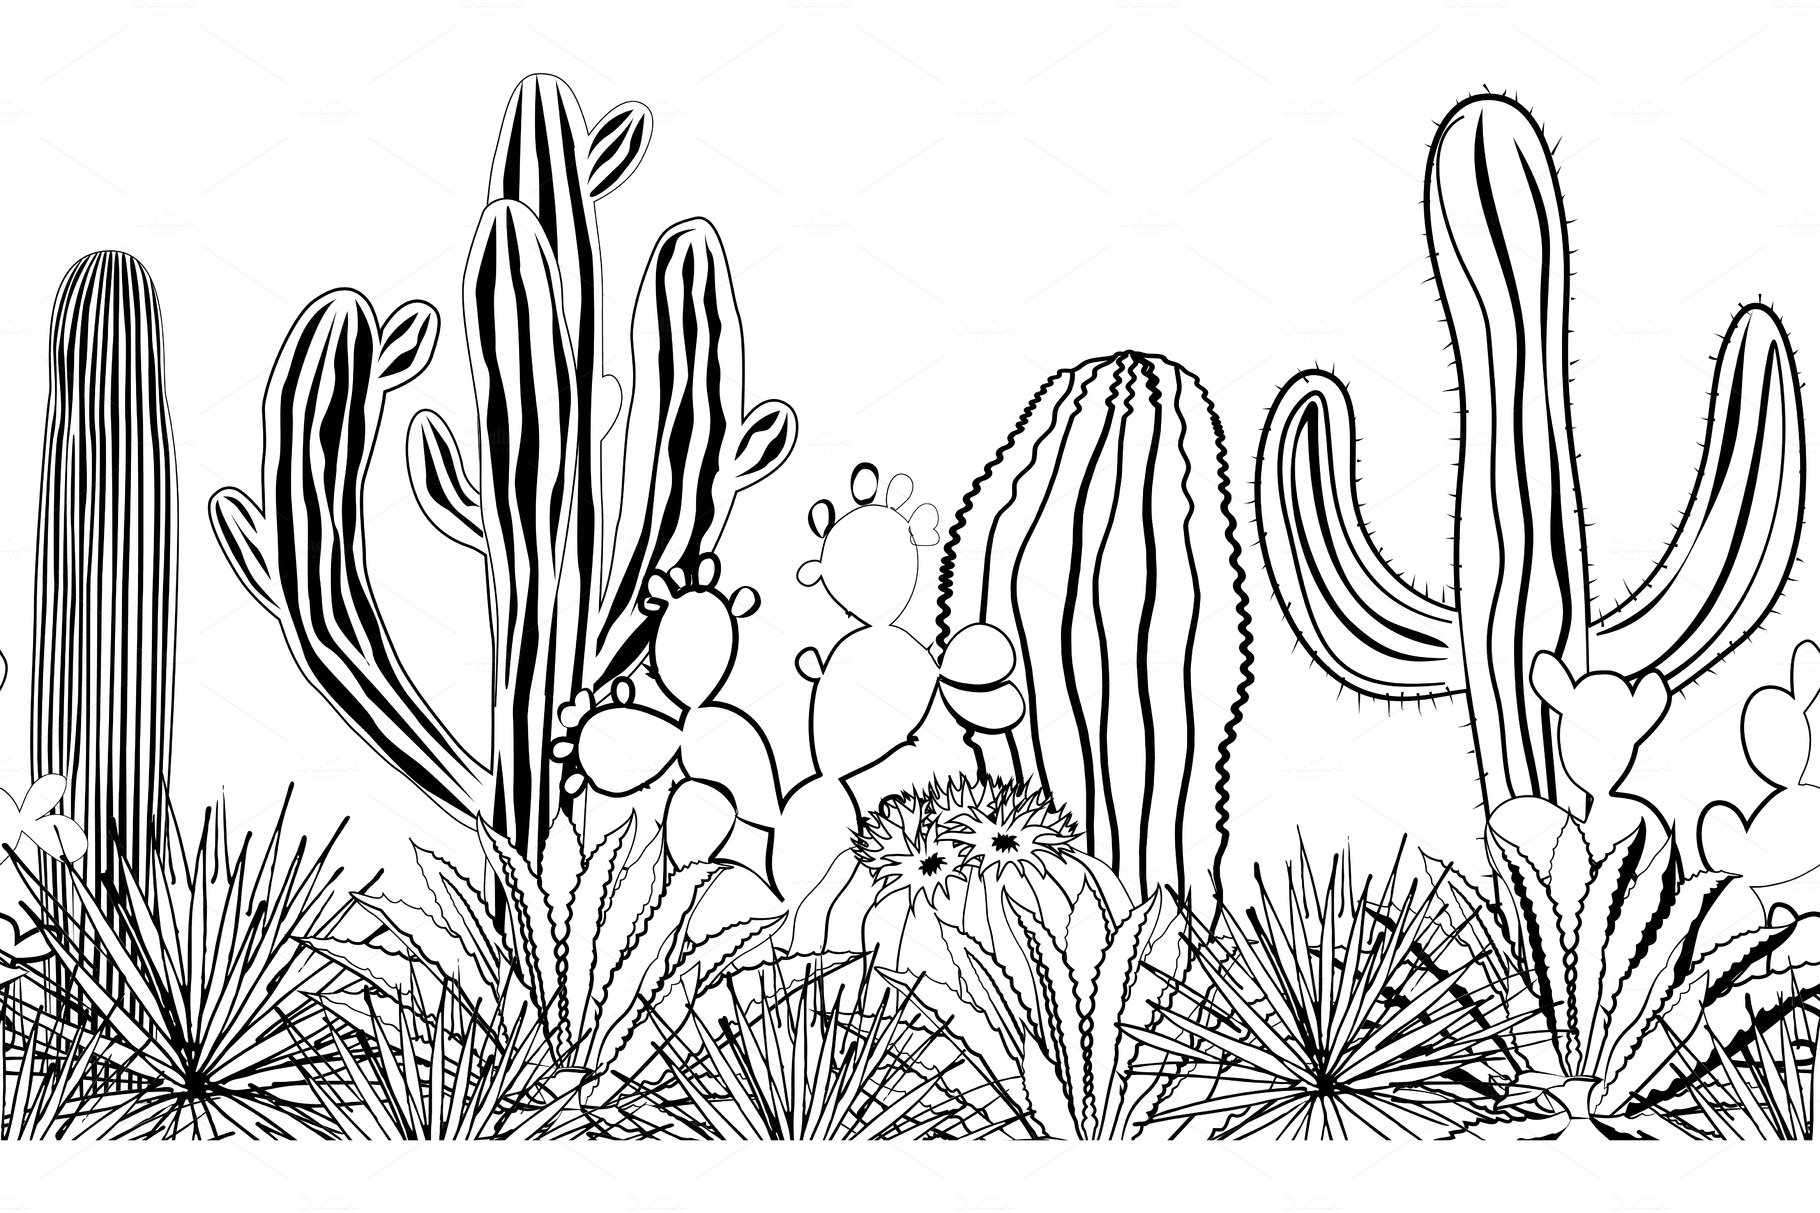 Line drawing of cactus plants.